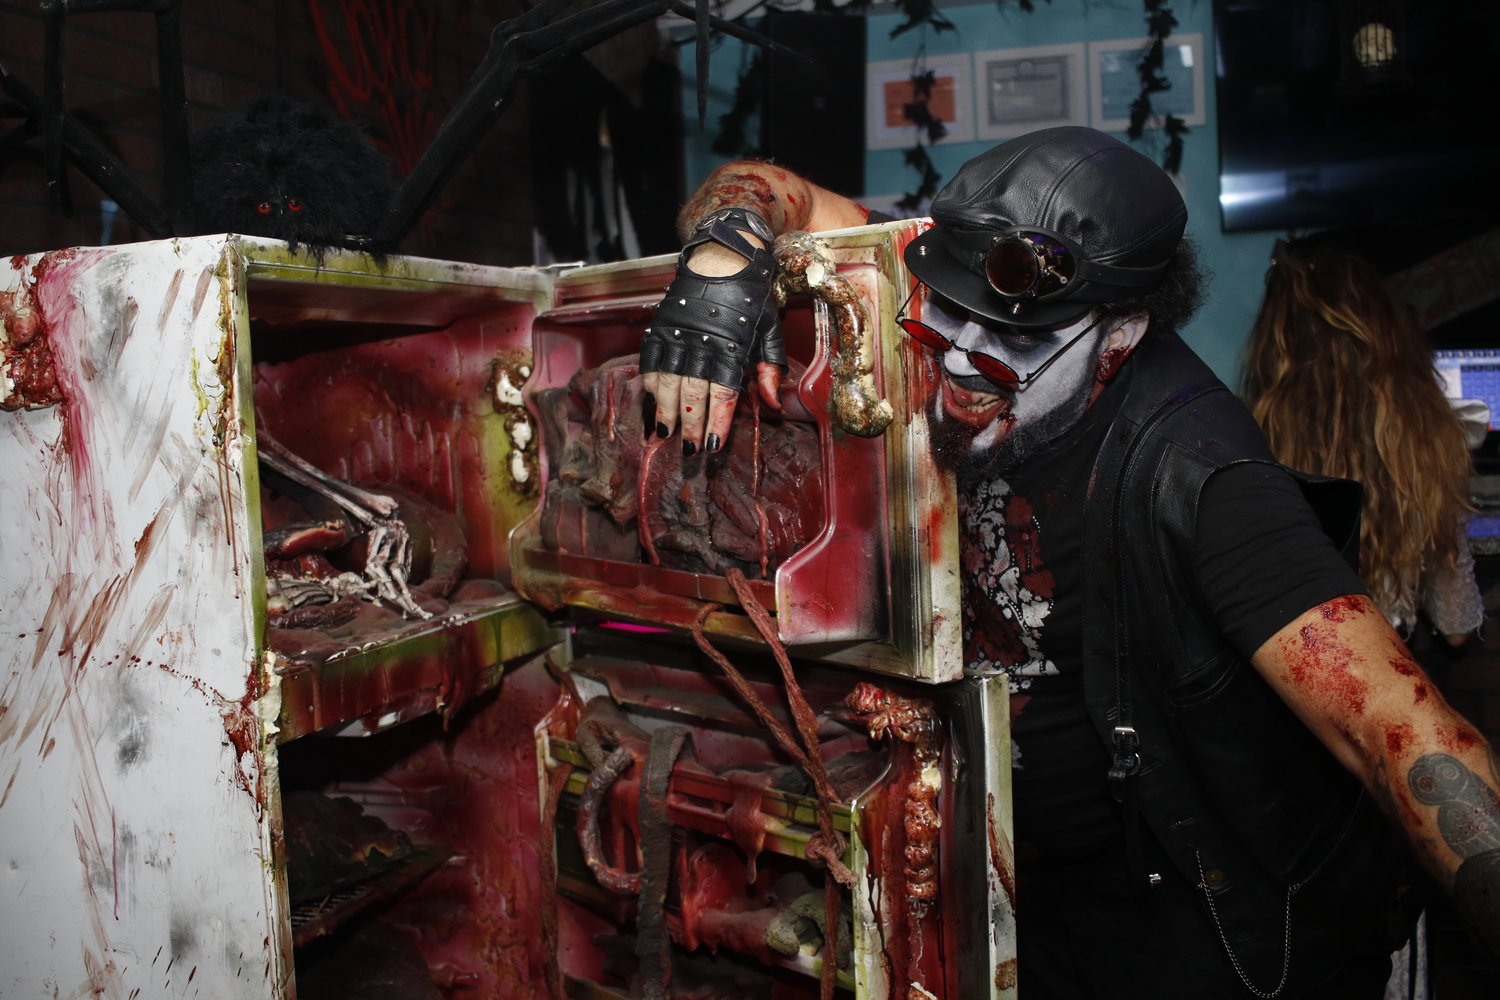 The Ravenous Ravenclaw, aka Robert Rios, checked out the meat locker for fresh blood.